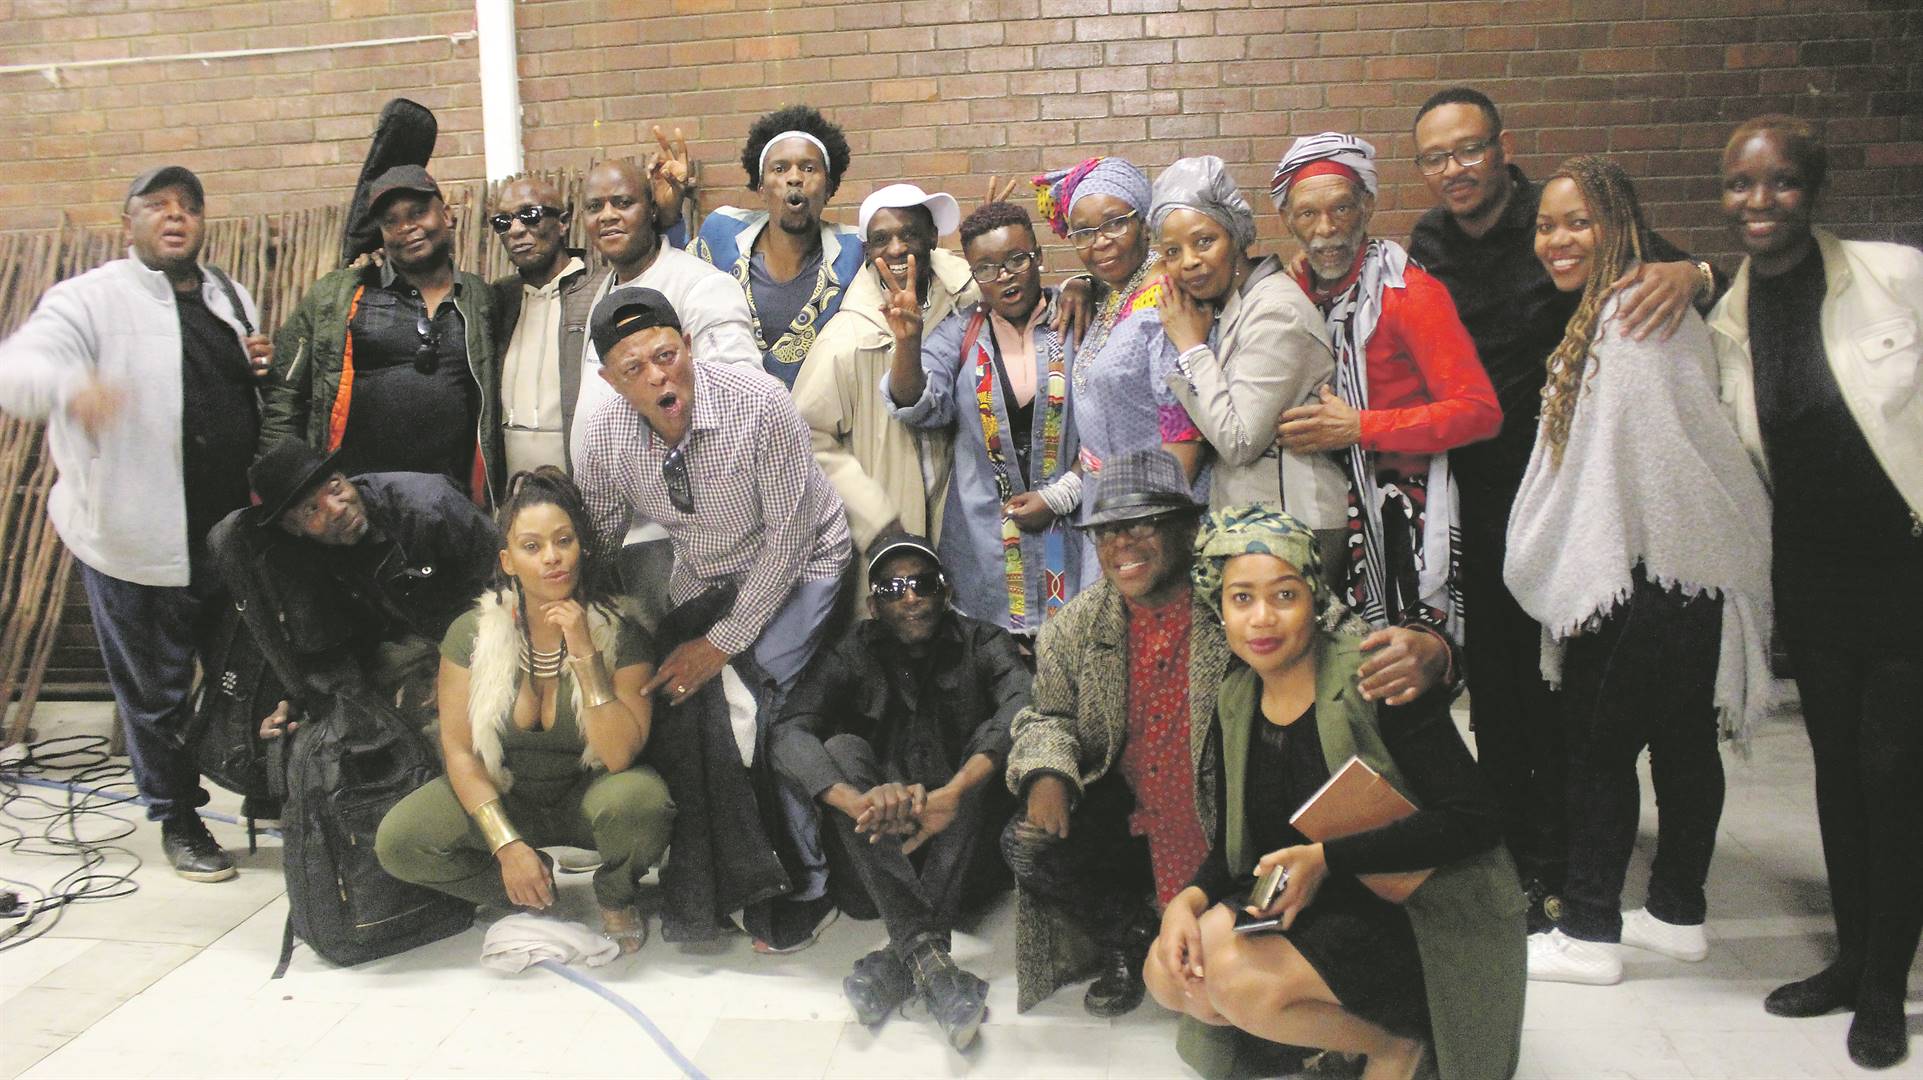 Musicians paid a visit to Makeleketla in the Free State